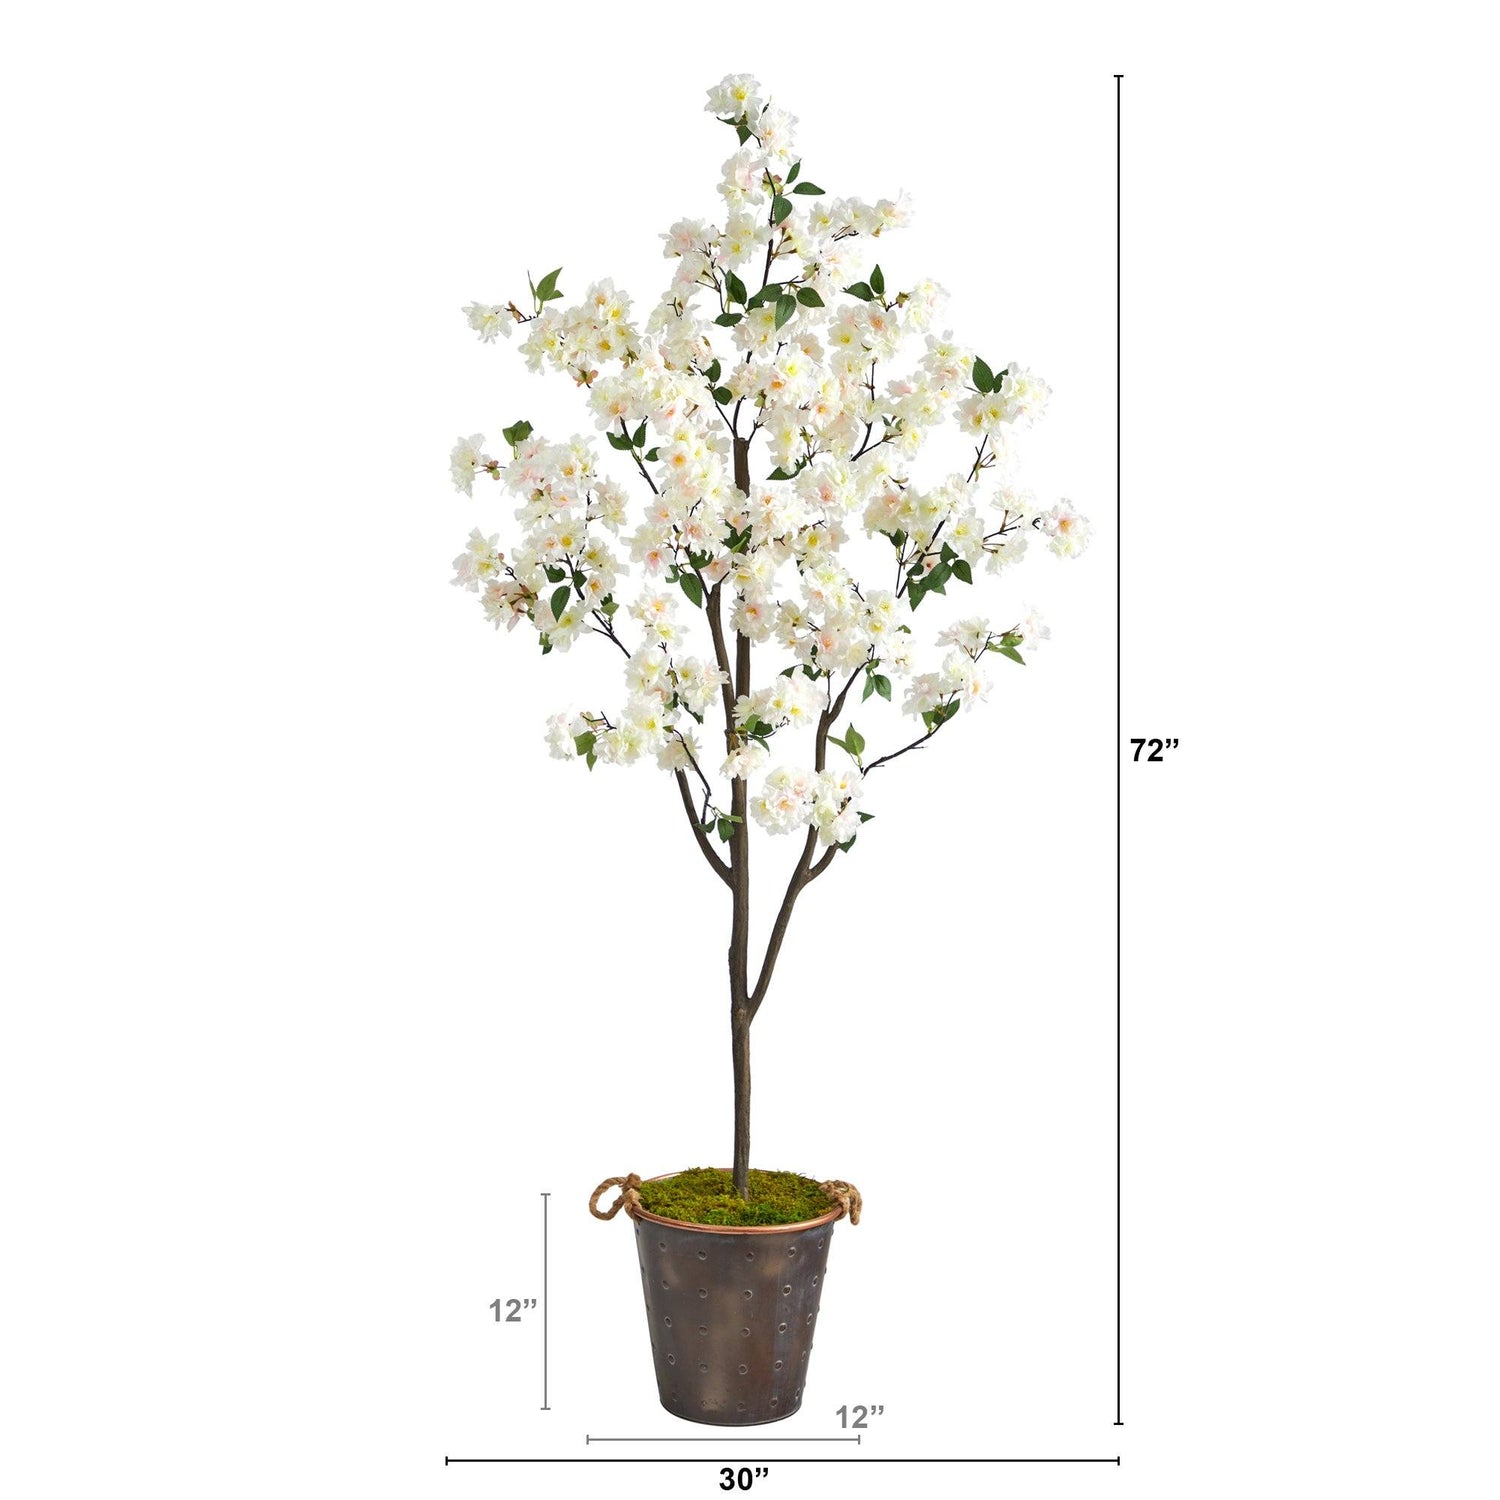 6' Cherry Blossom Artificial Tree in Decorative Metal Pail with